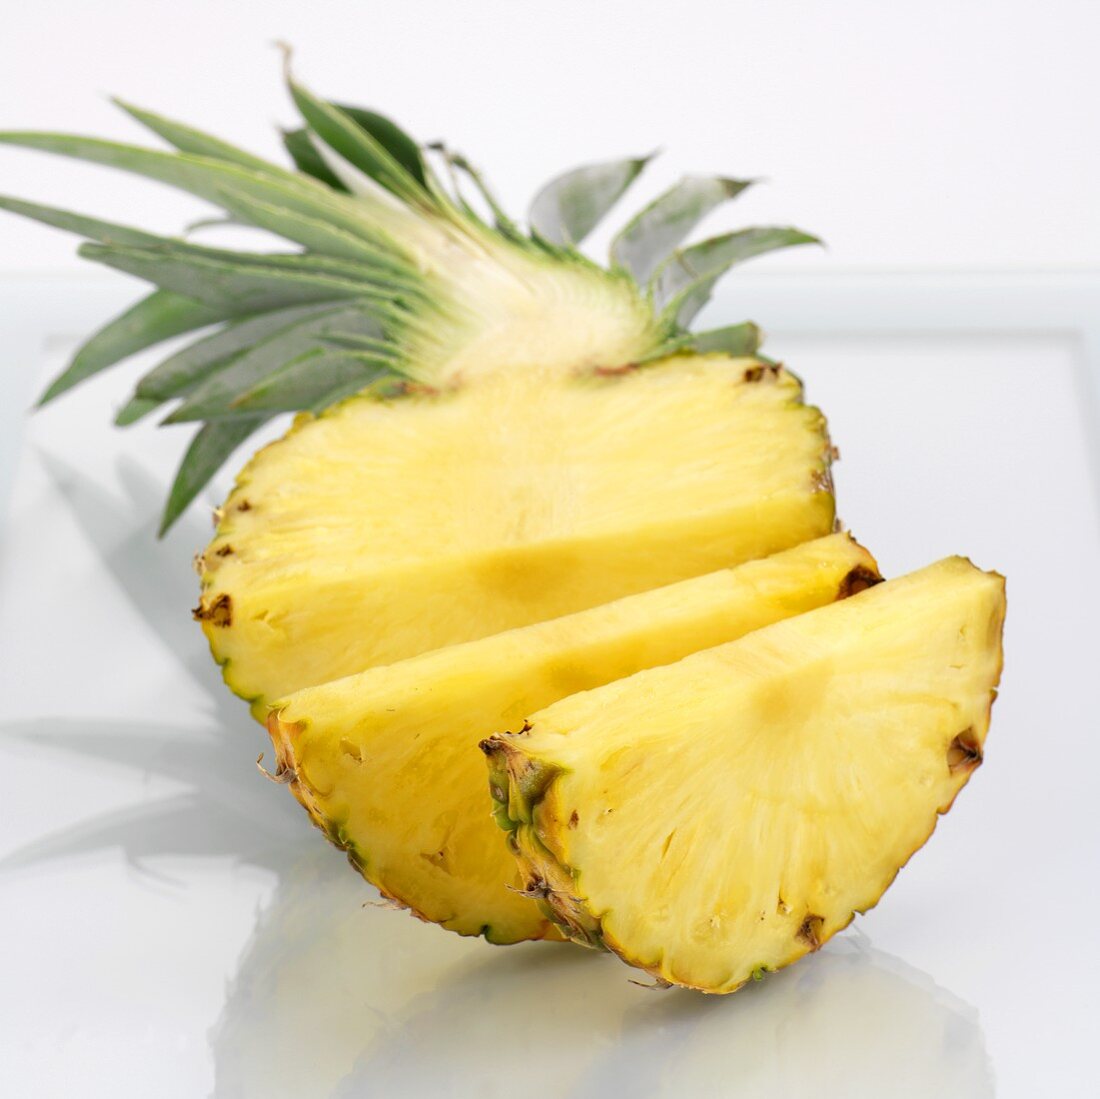 Half a pineapple, partly sliced